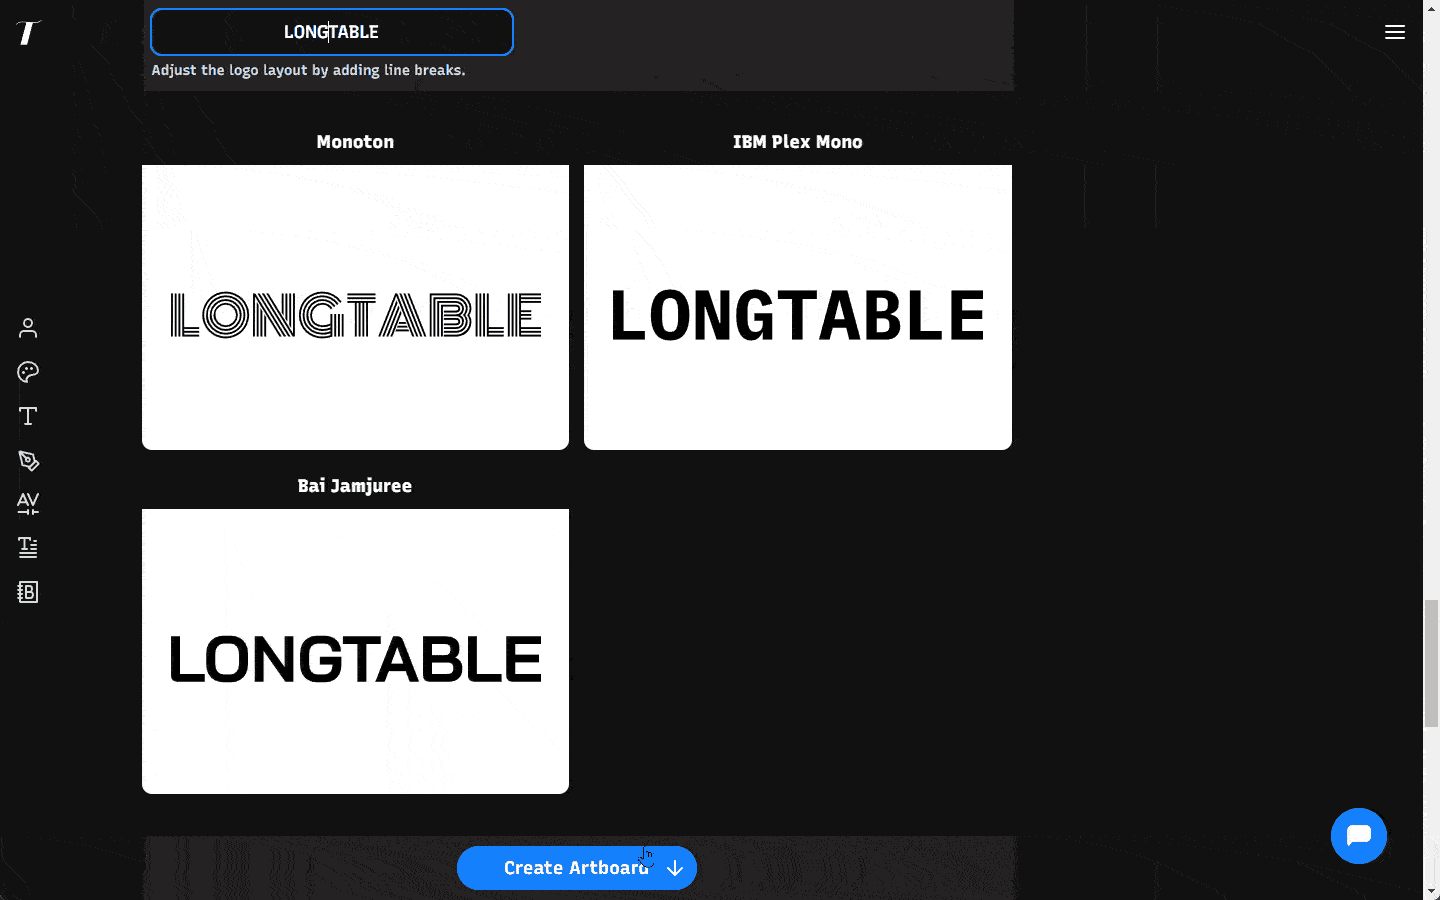 Easy multi-line layout to enable users to quickly design logo 